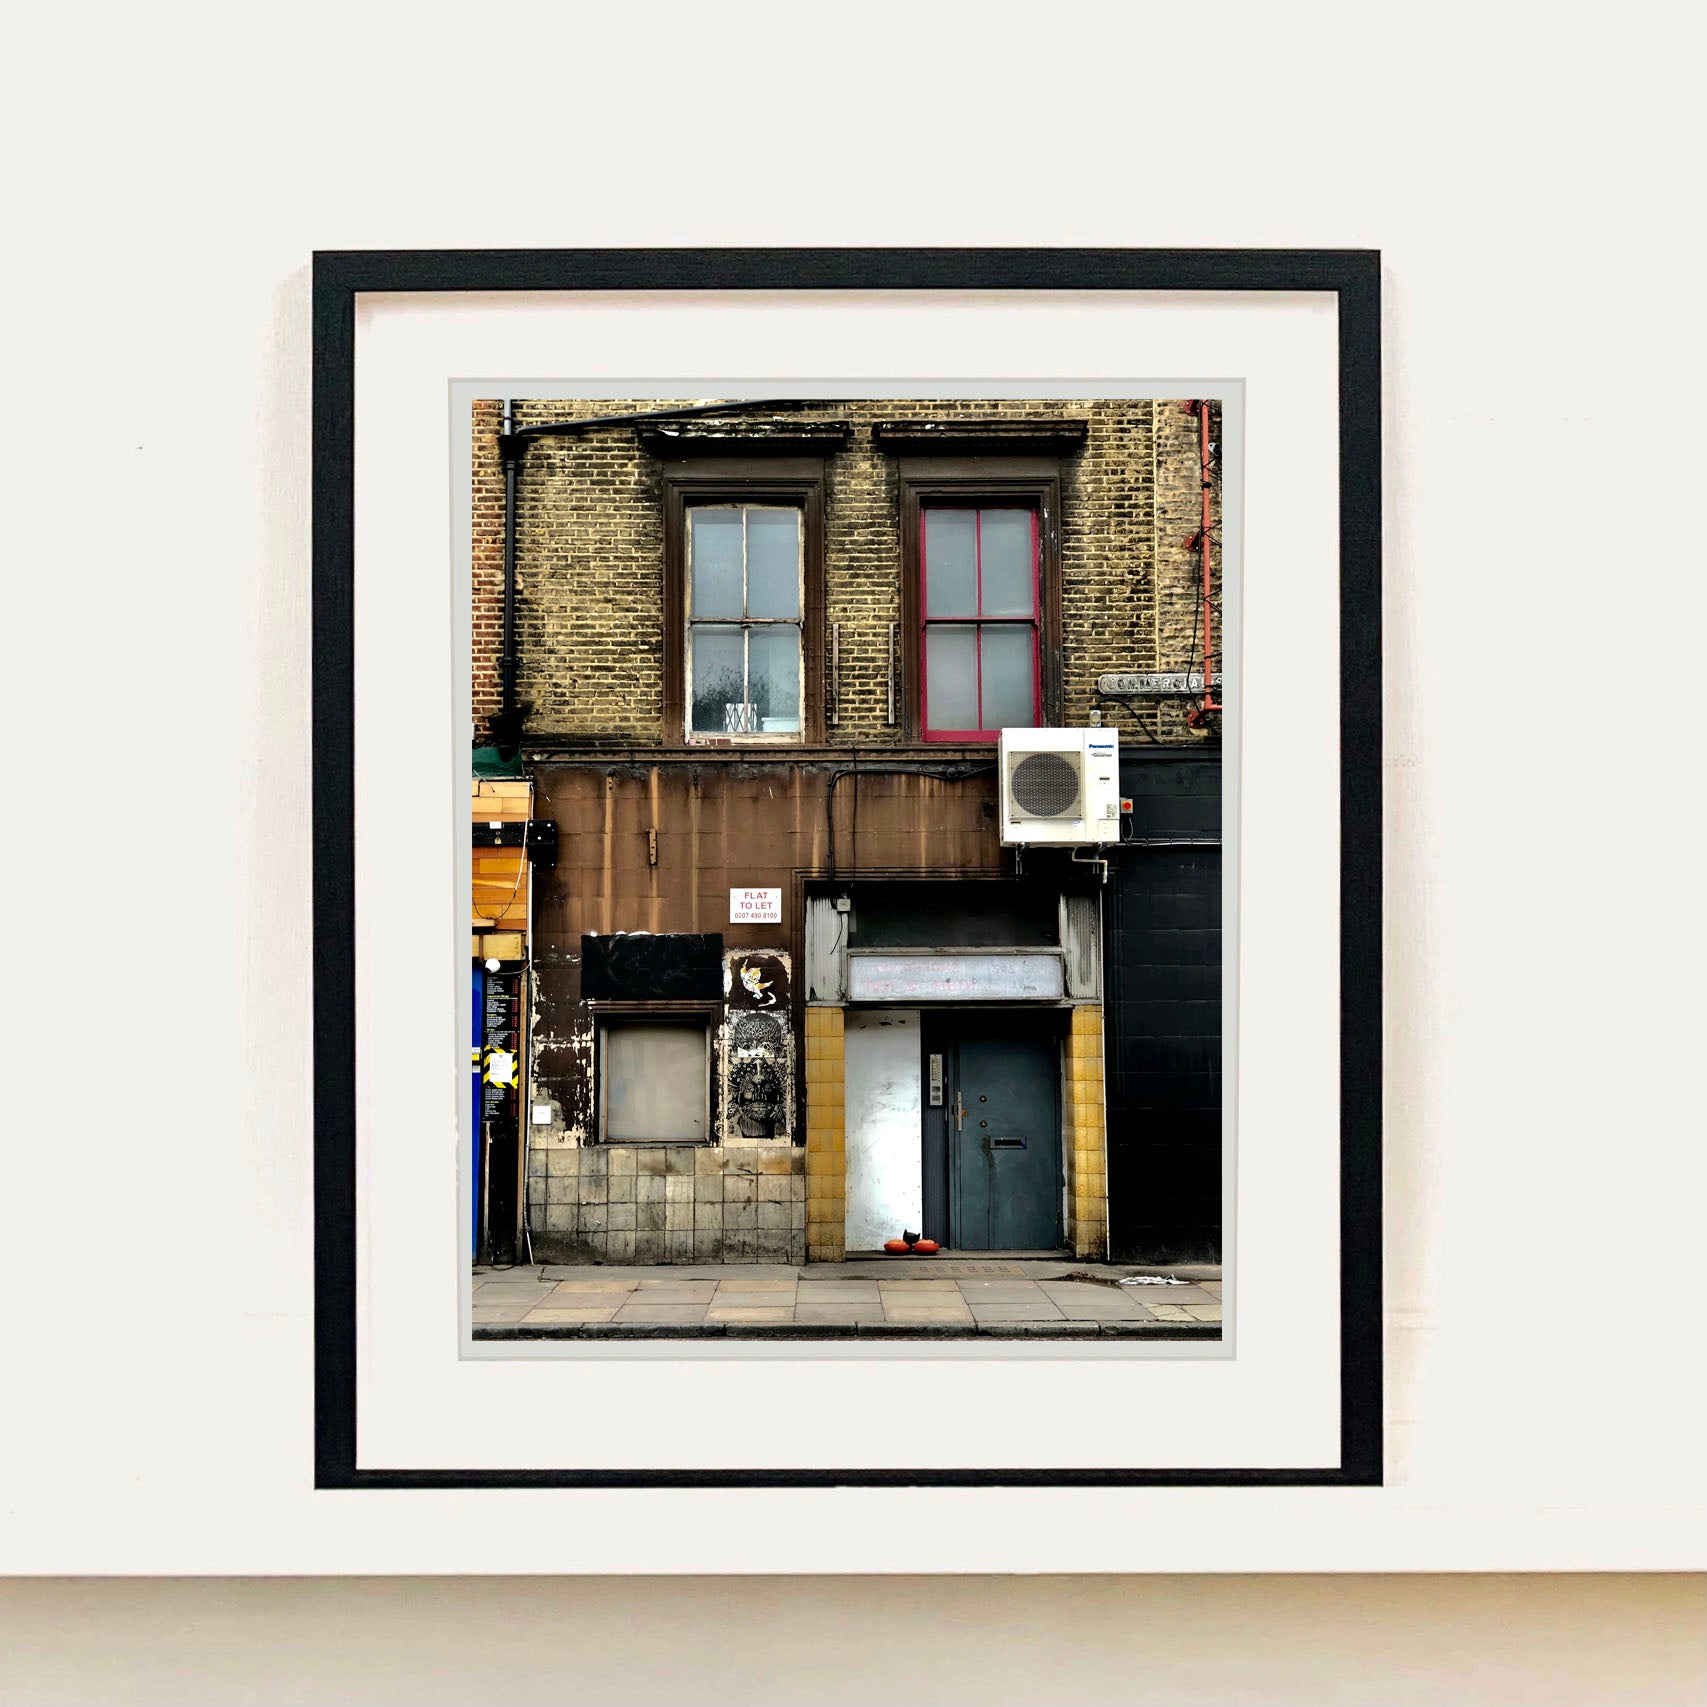 East London brick building architecture photograph by Richard Heeps framed in black